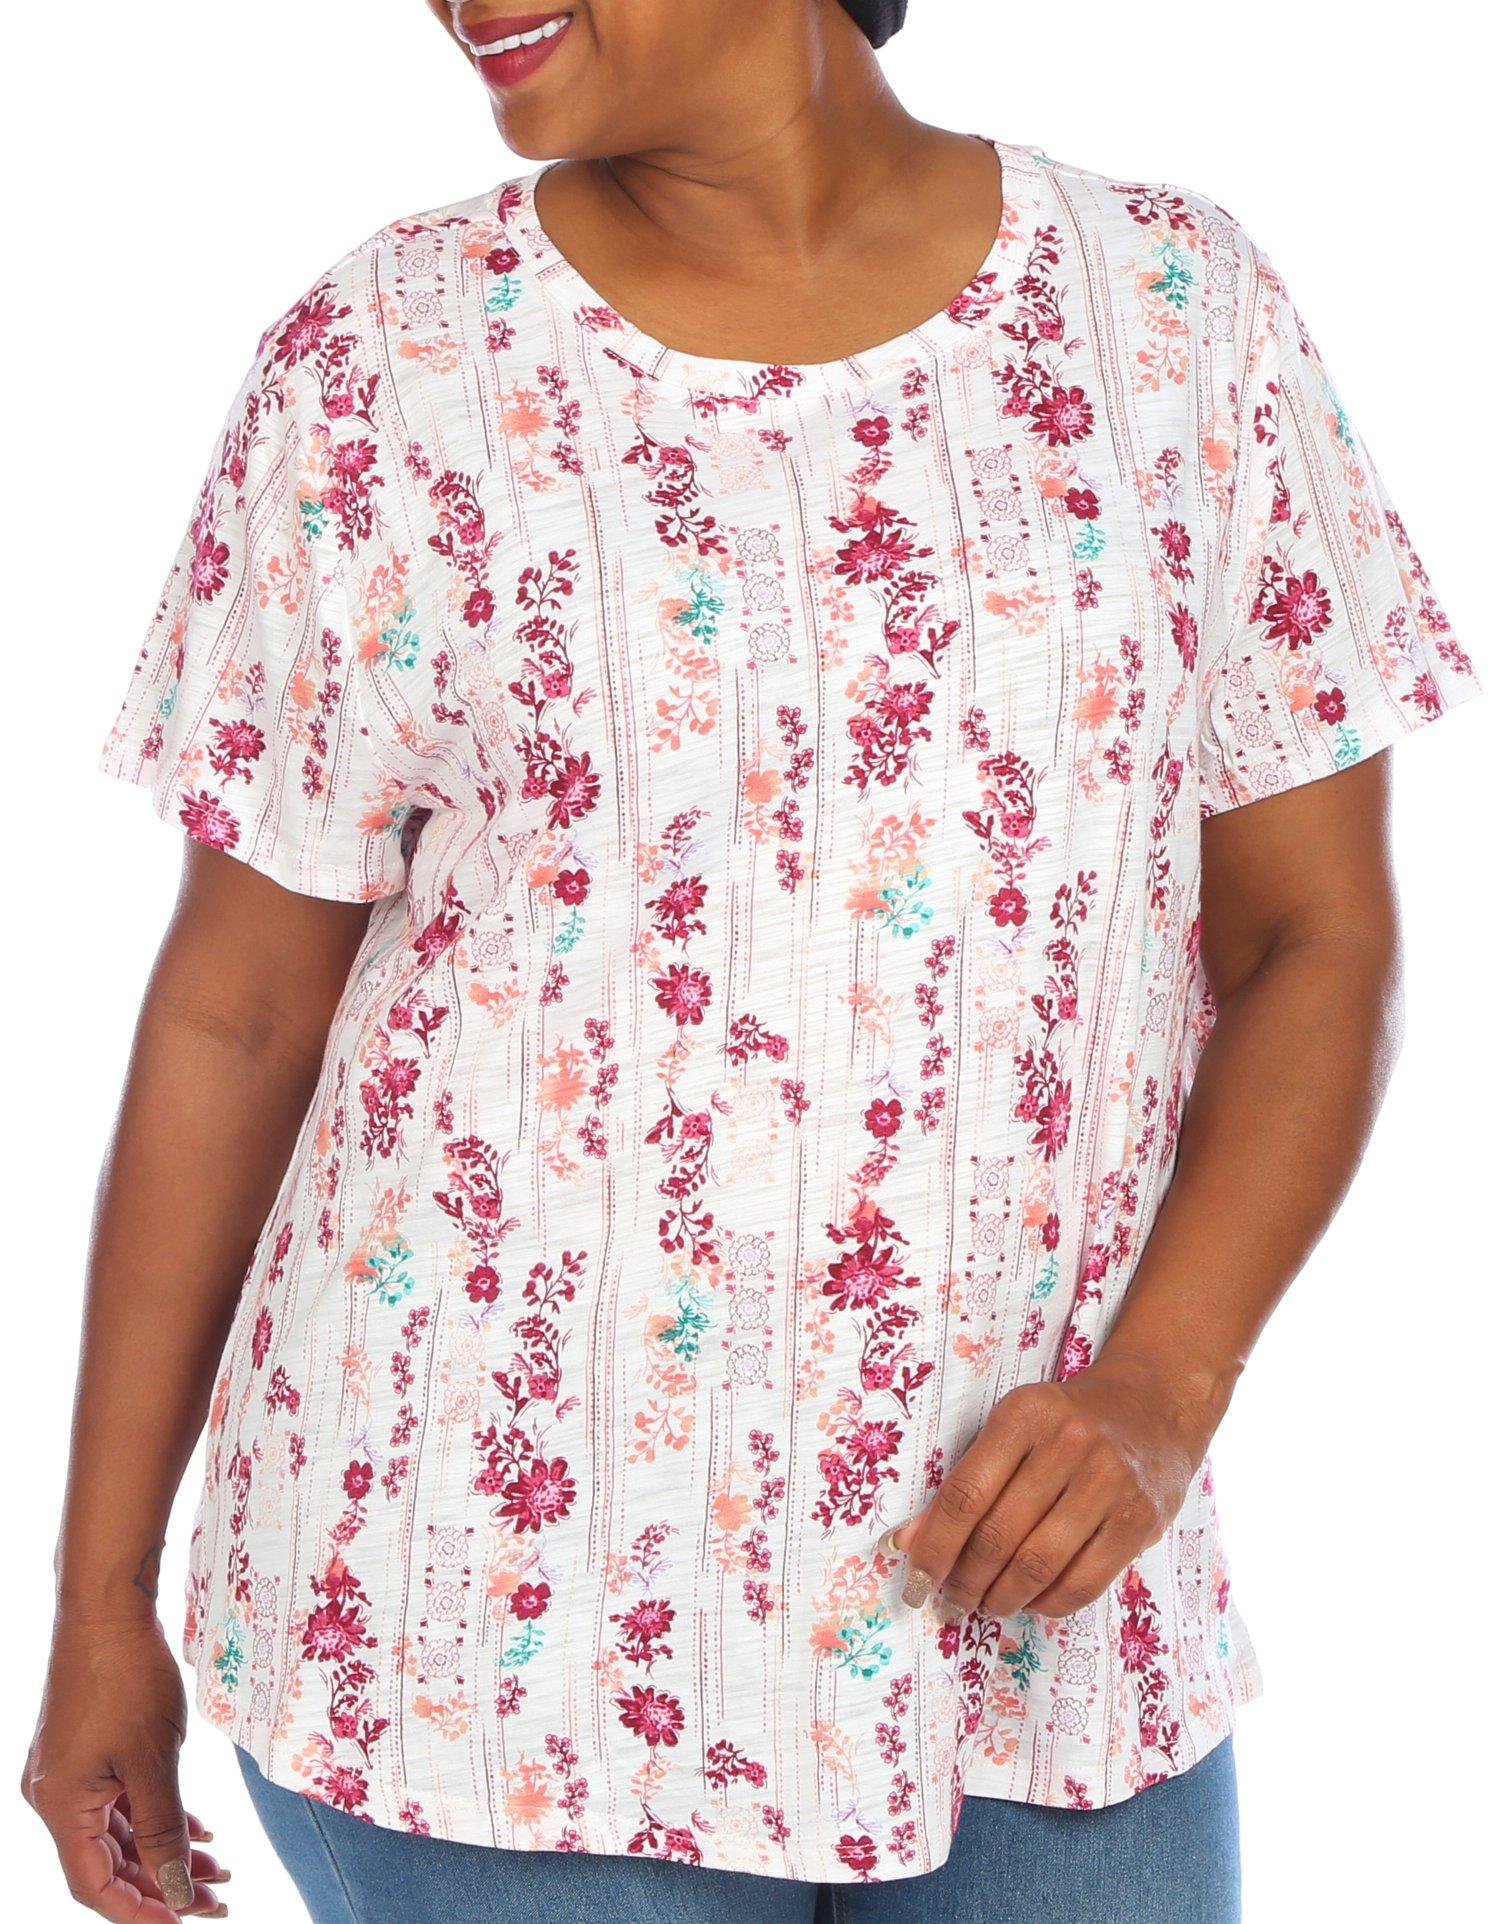 Plus Floral Panel Luxey Short Sleeve Tee